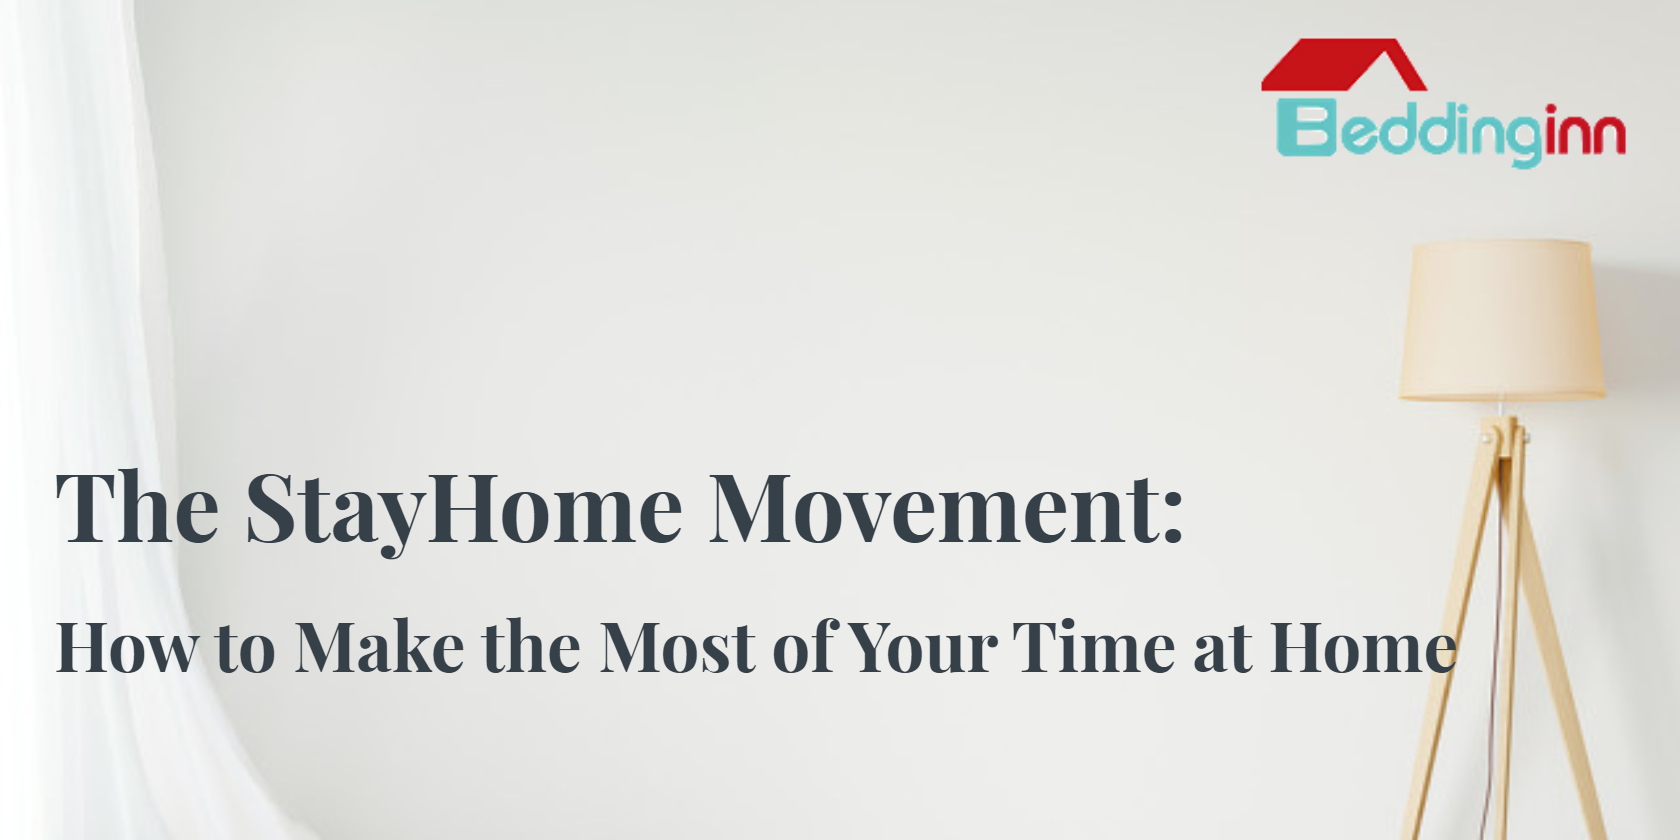 The StayHome Movement: How to Make the Most of Your Time at Home.